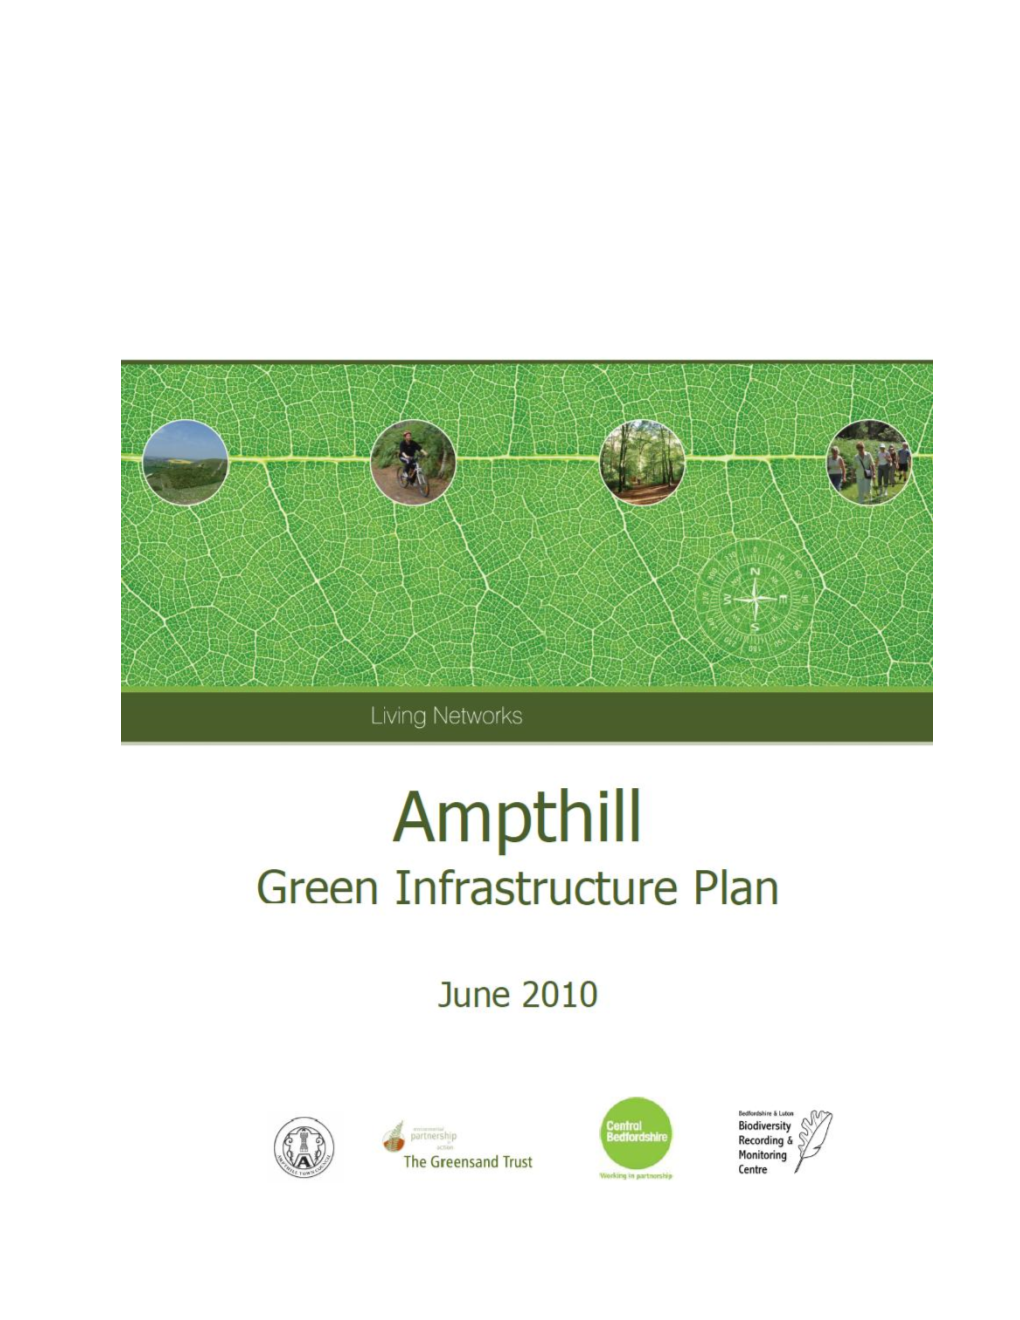 Ampthill GI Plan, Will Be Used by the Authority in Considering Development Proposals and Assisting with the Creation of Green Infrastructure Assets